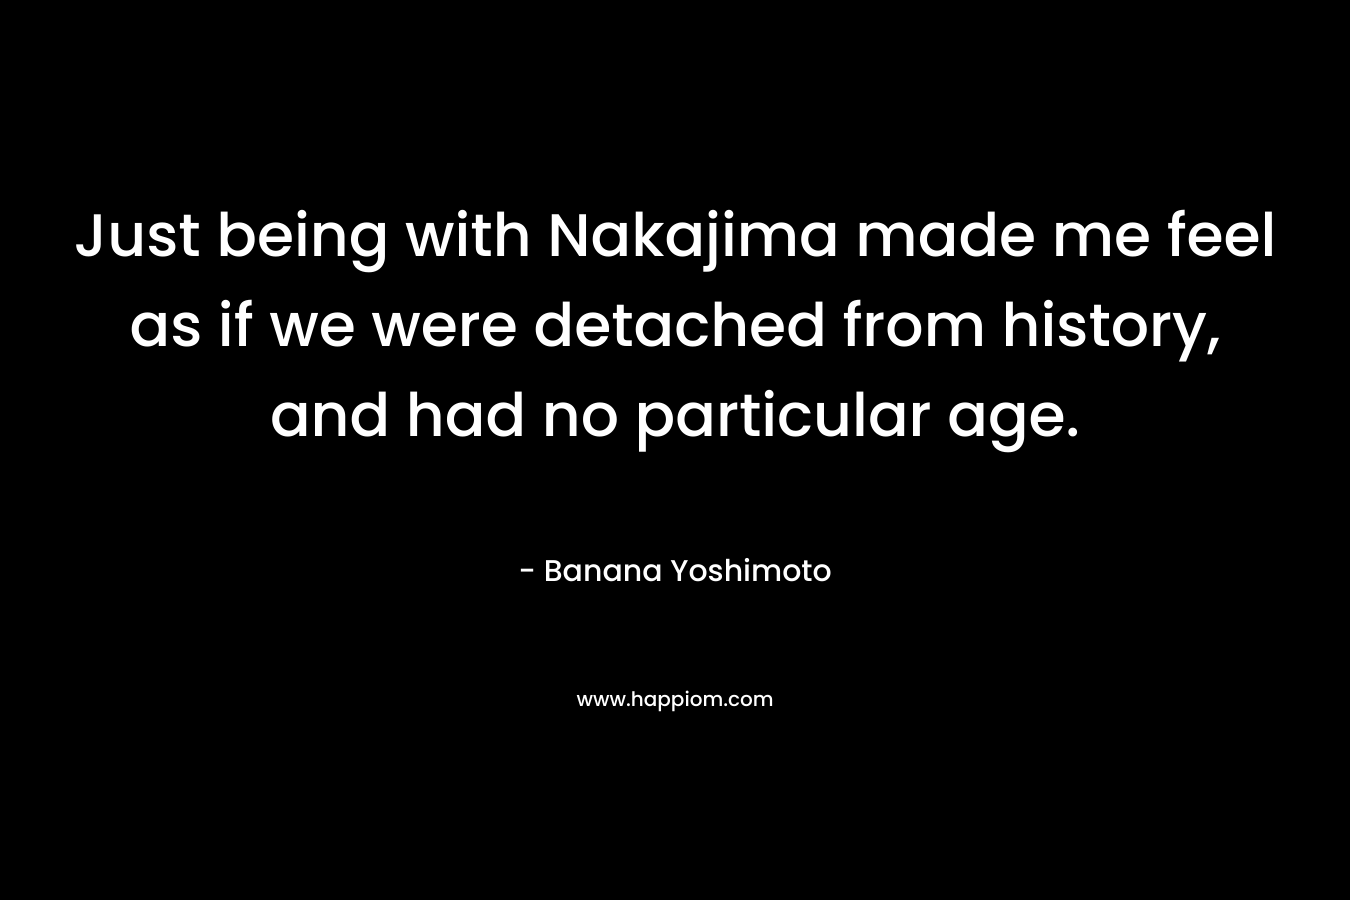 Just being with Nakajima made me feel as if we were detached from history, and had no particular age.